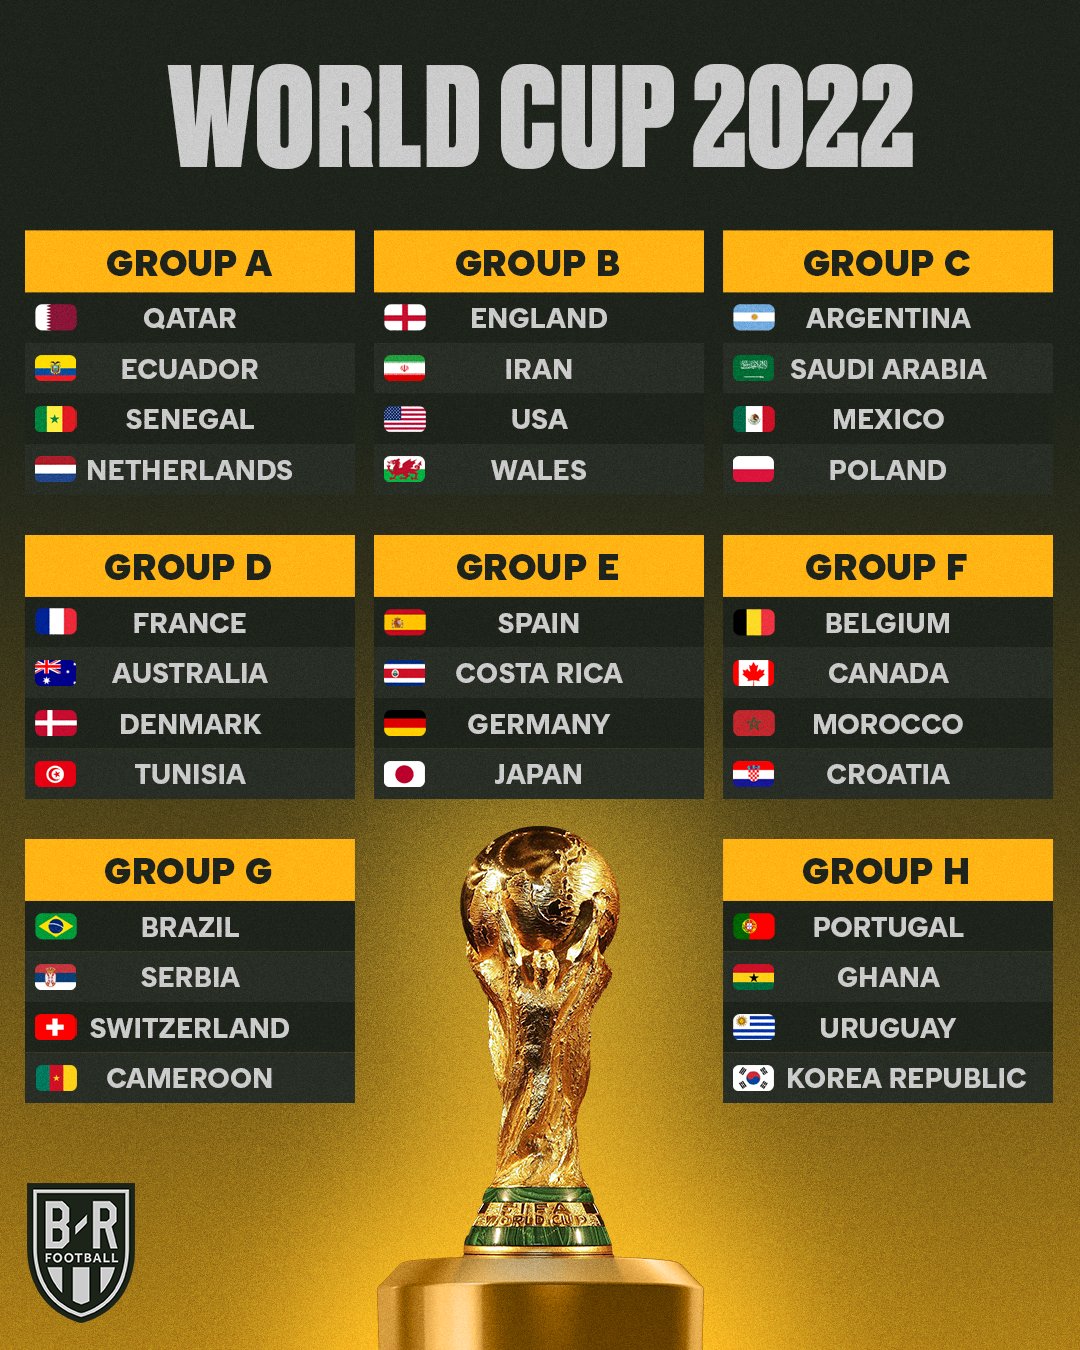 B/R Football on Twitter: "The complete 2022 World Cup groups. CAN'T. WAIT  🍿 https://t.co/dDqooEq7zc" / Twitter